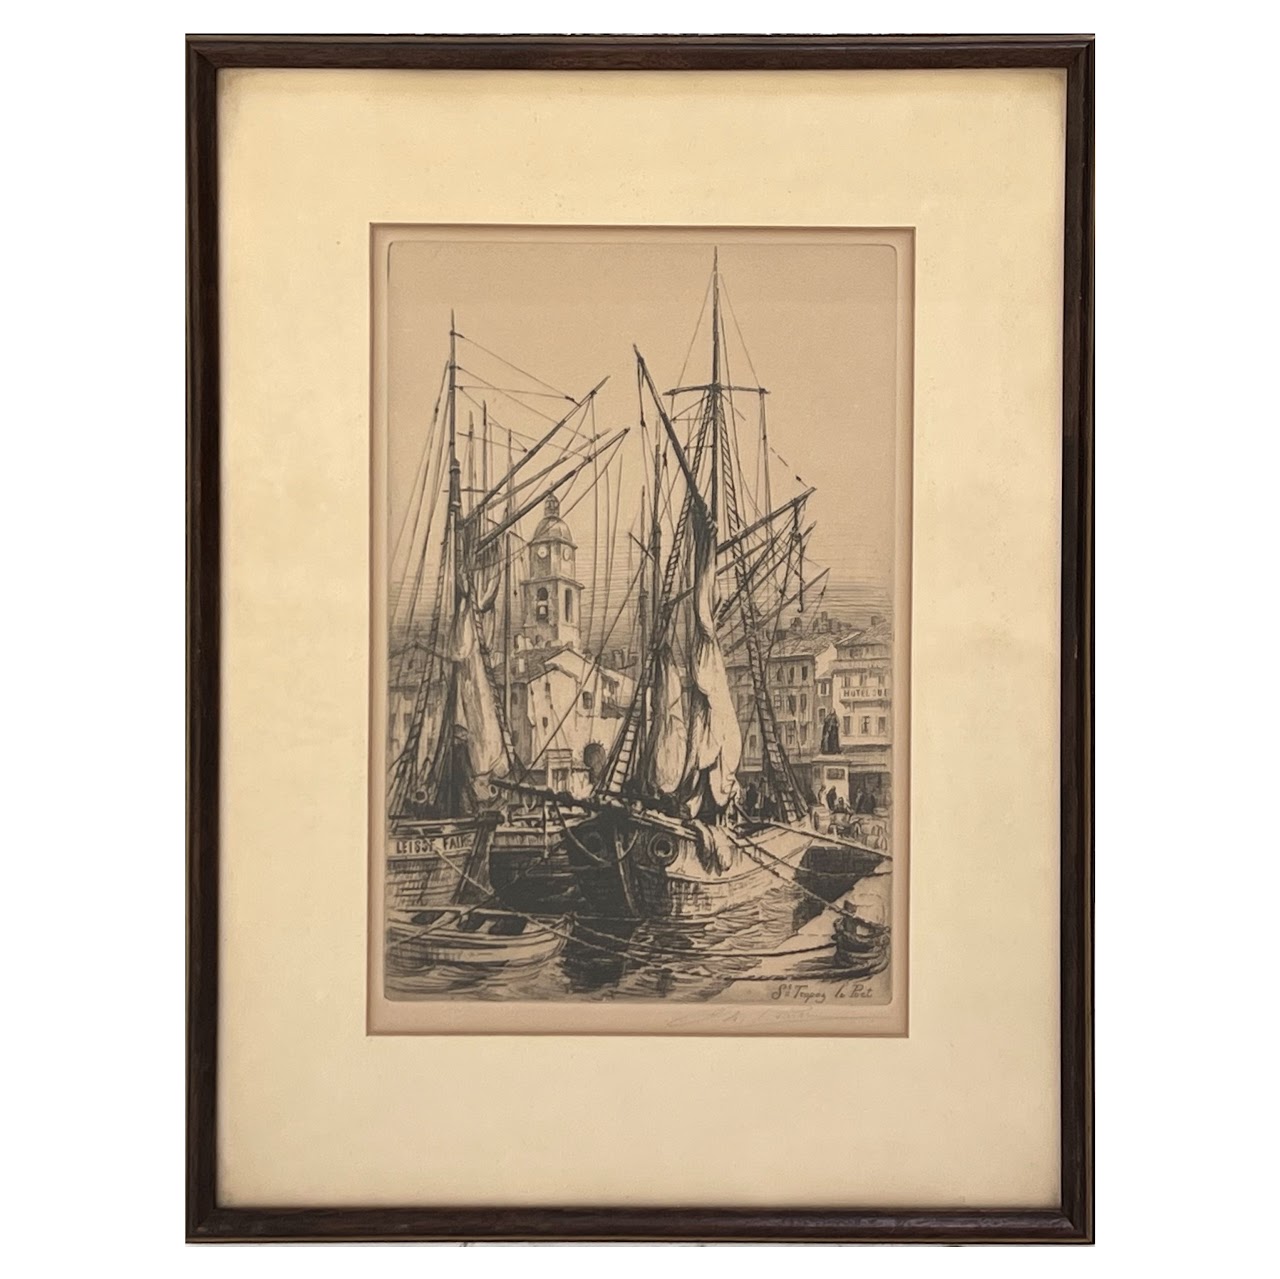 Charles Pinet 'St Tropez le Port' Signed Etching